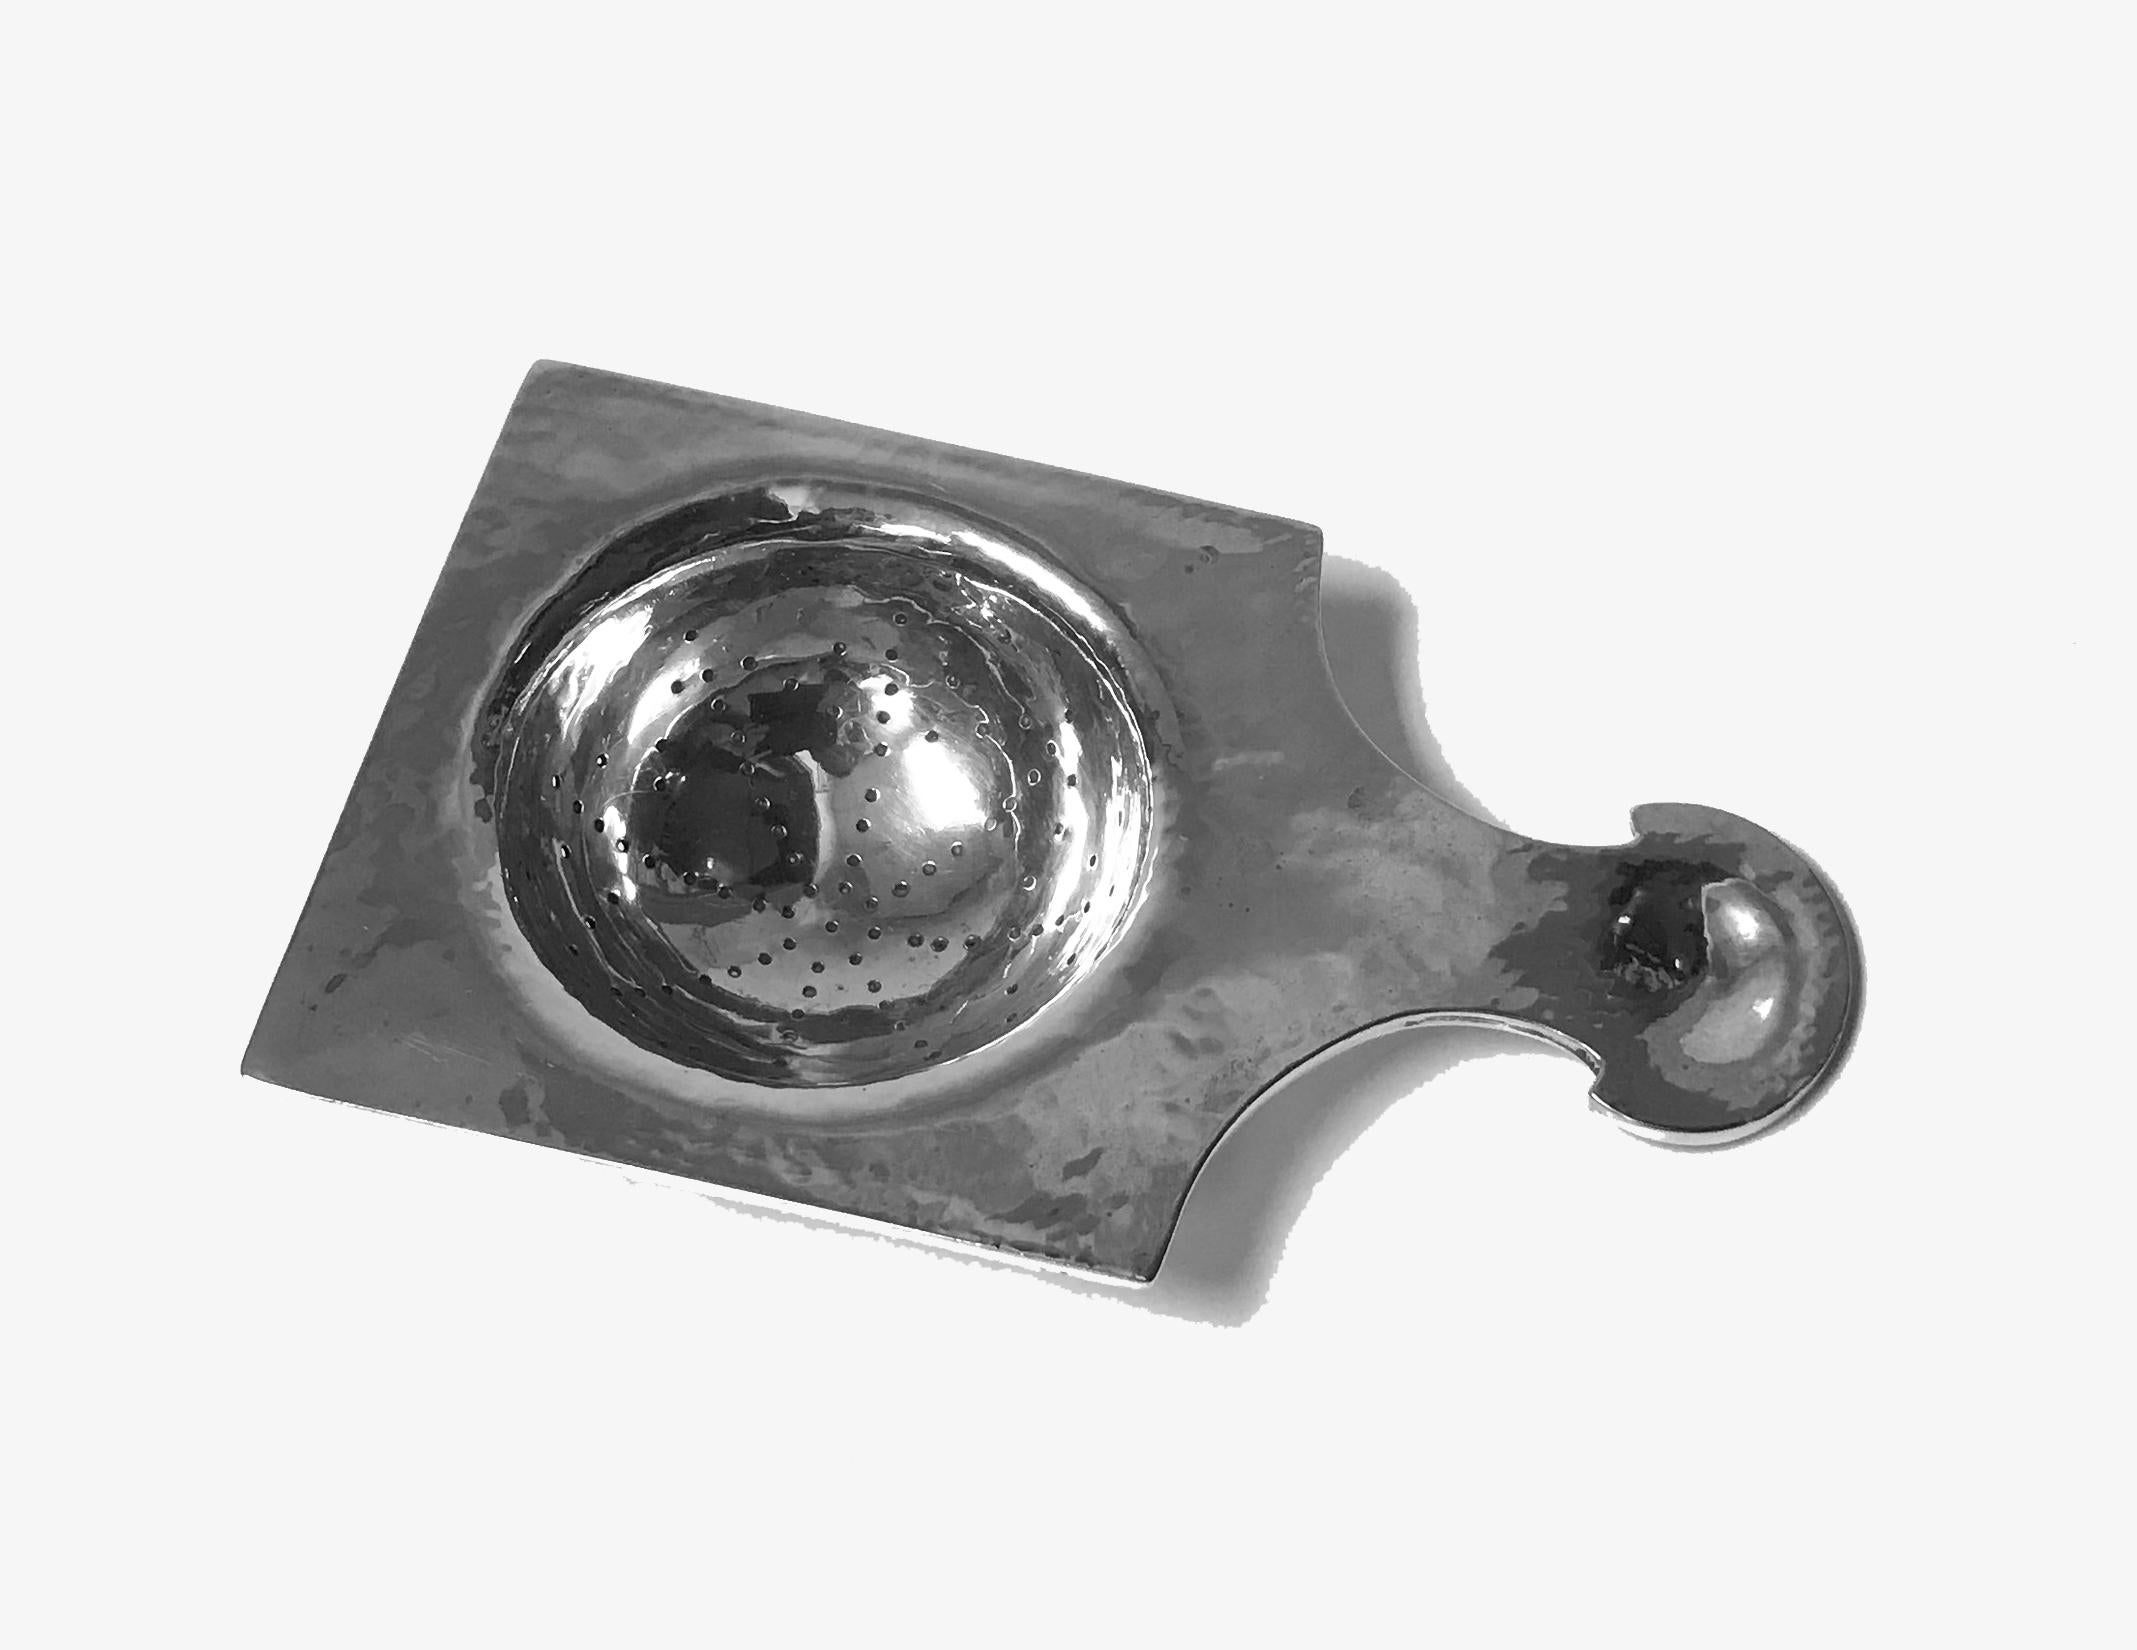 Arts & Crafts silver tea strainer, Emmy Roth, Germany, circa 1920. The hammered silver strainer of plain square form with curvilinear stylised handle. Full marks to reverse. Measures: 4.75 x 3.00 x 1.00 inches. Weight: 66.50 grams. Emmy Roth